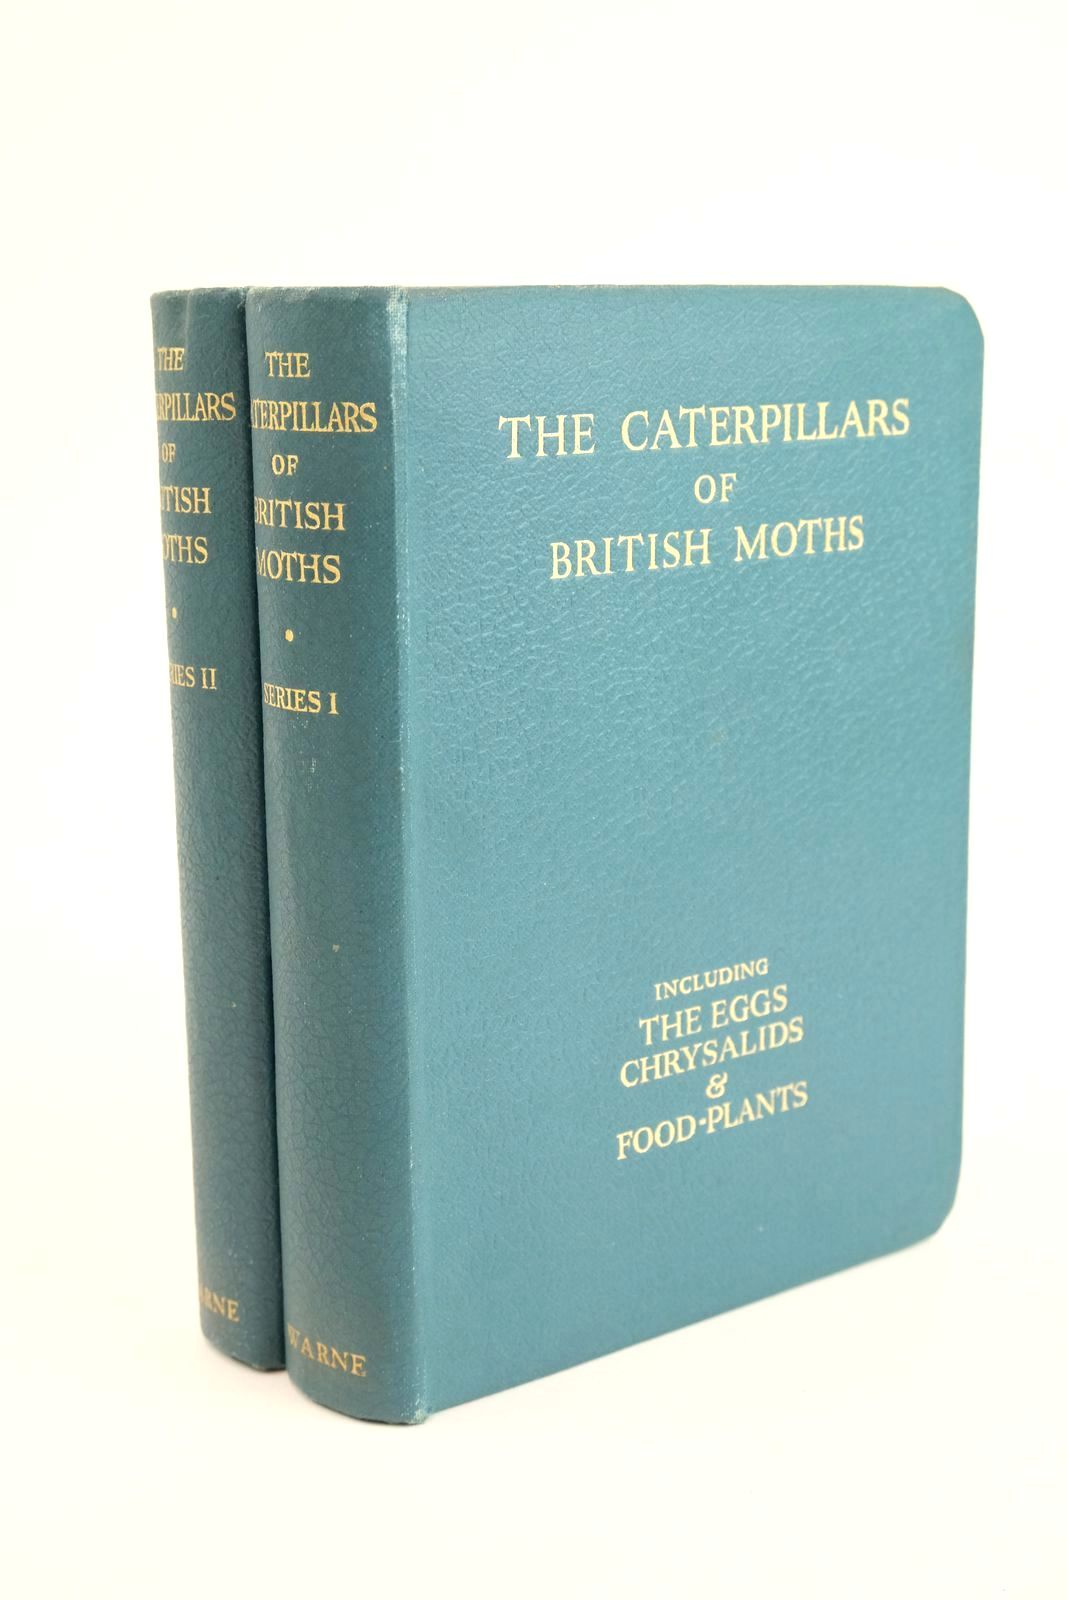 Photo of THE CATERPILLARS OF BRITISH MOTHS (2 VOLUMES) written by Stokoe, W.J.
Stovin, G.H.T. illustrated by Dollman, J.C. published by Frederick Warne & Co Ltd. (STOCK CODE: 1323742)  for sale by Stella & Rose's Books